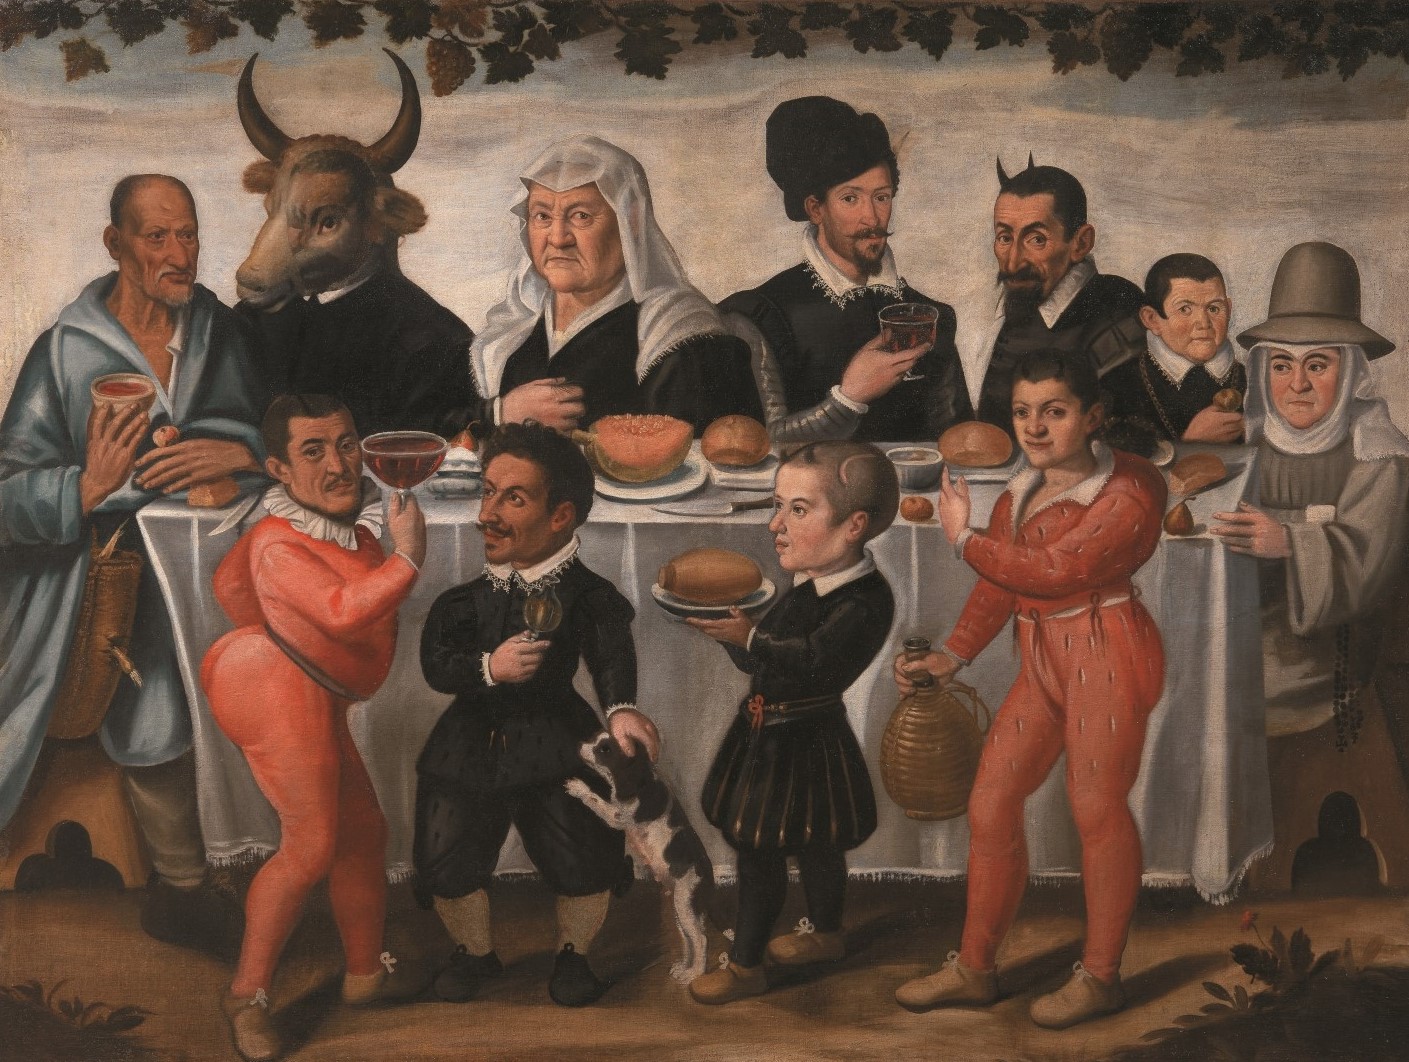 Jesters, villains and gamblers at the Medici court